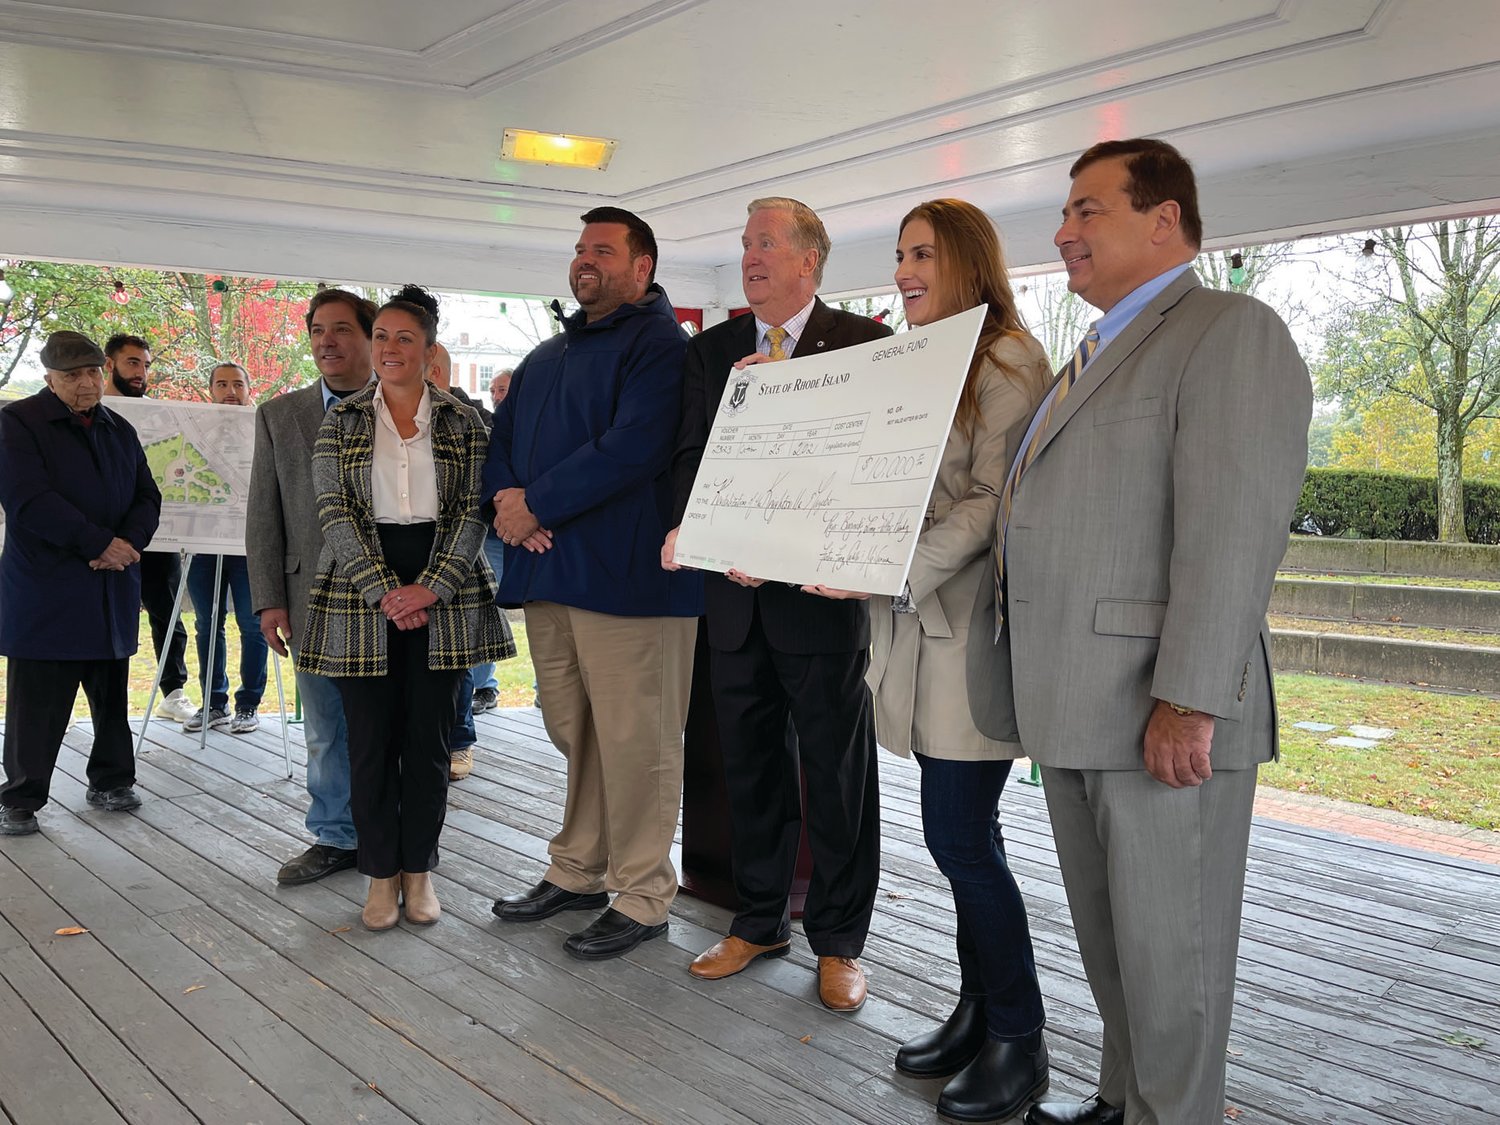 STATE SUPPORT: From left, Ward 4 Councilman Richard Campopiano, Citywide Councilwoman Nicole Renzulli, Council President Chris Paplauskas, Mayor Ken Hopkins, Rep. Jacquelyn Baginski and Speaker K. Joseph Shekarchi gather for the presentation of a $10,000 legislative grant in support of the Knightsville revitalization project.